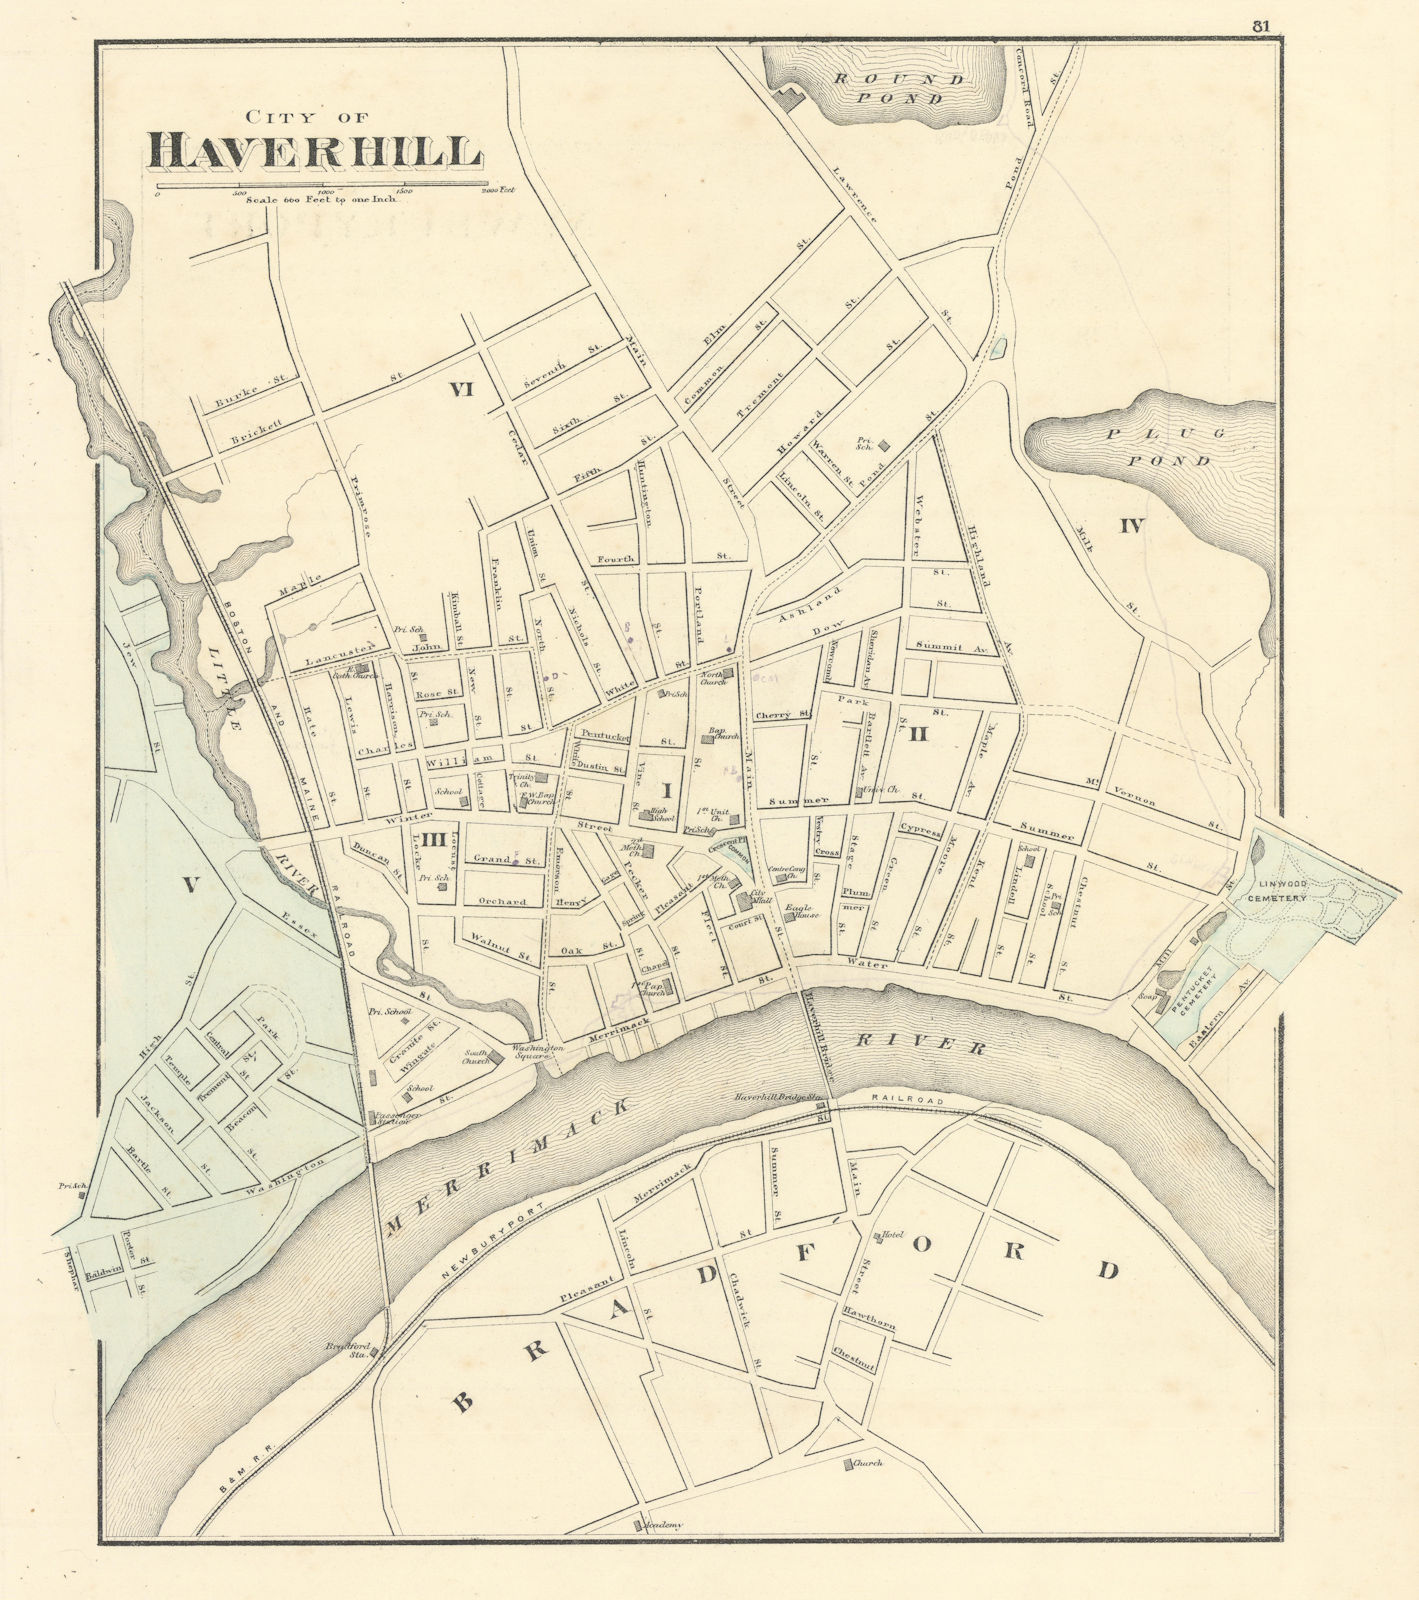 Associate Product City of Haverhill, Massachusetts. Town plan. WALLING & GRAY 1871 old map